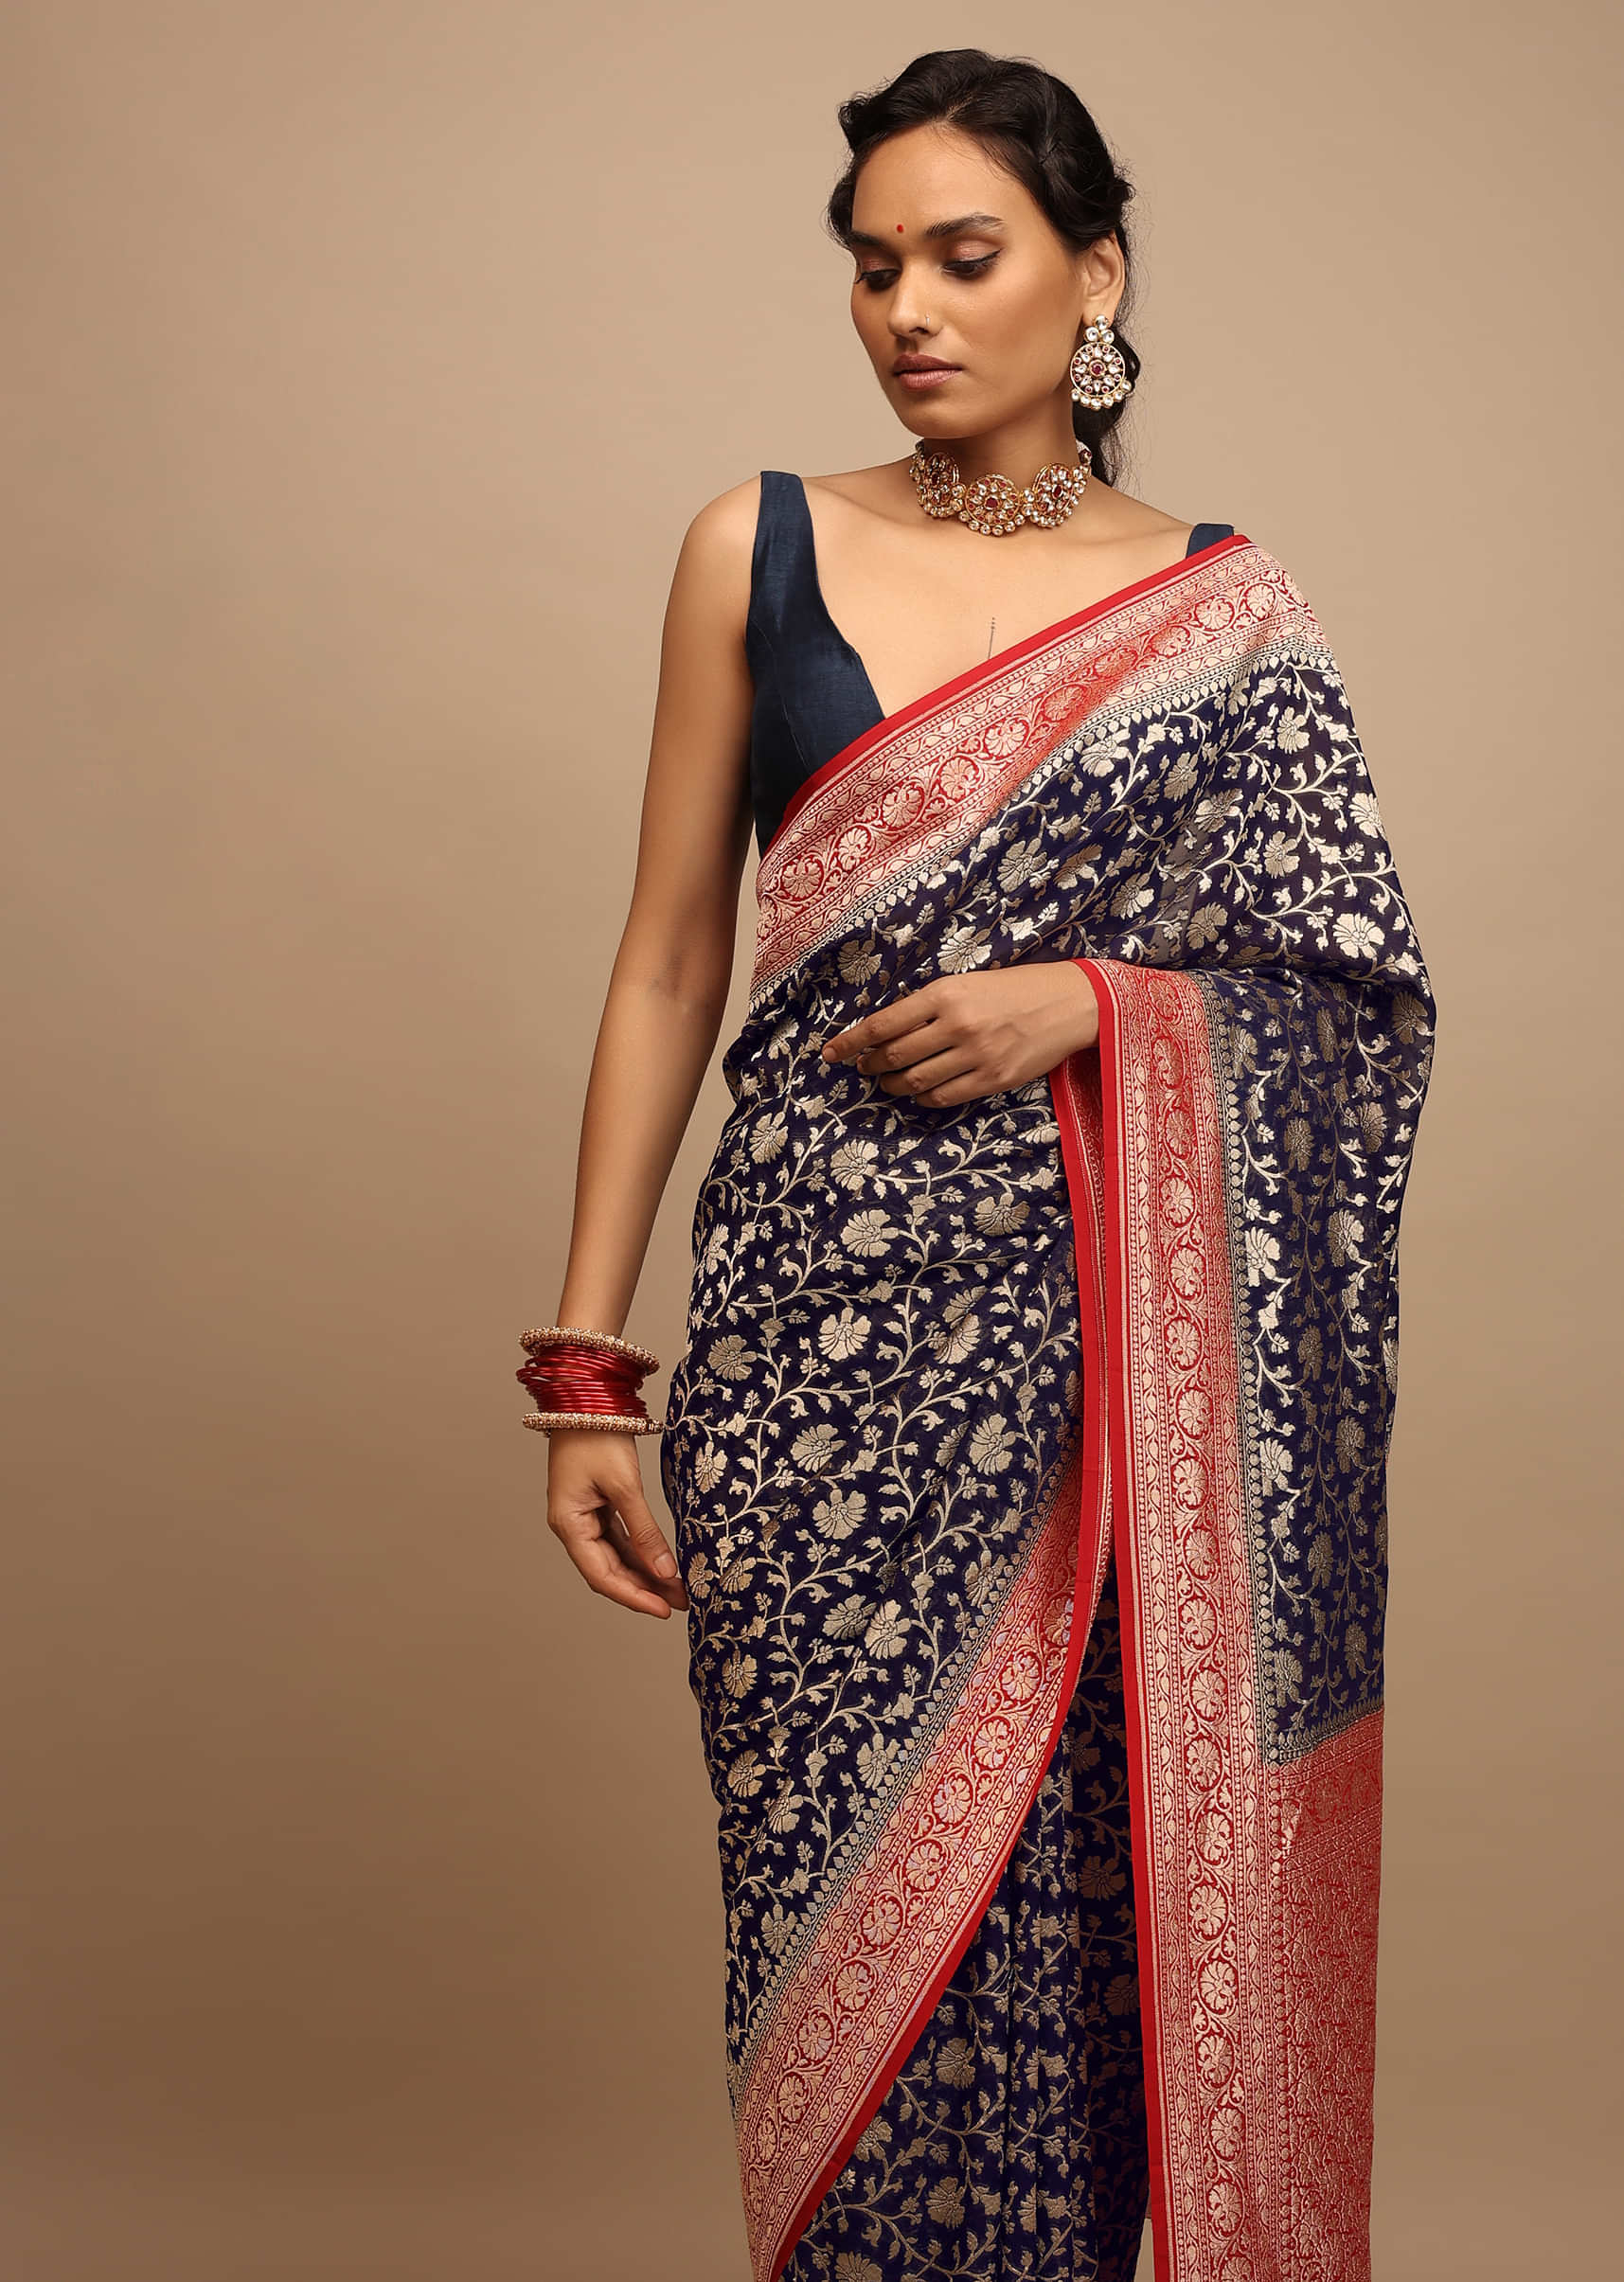 Navy Blue Saree In Georgette With Contrasting Red Border And Woven Floral Jaal Work